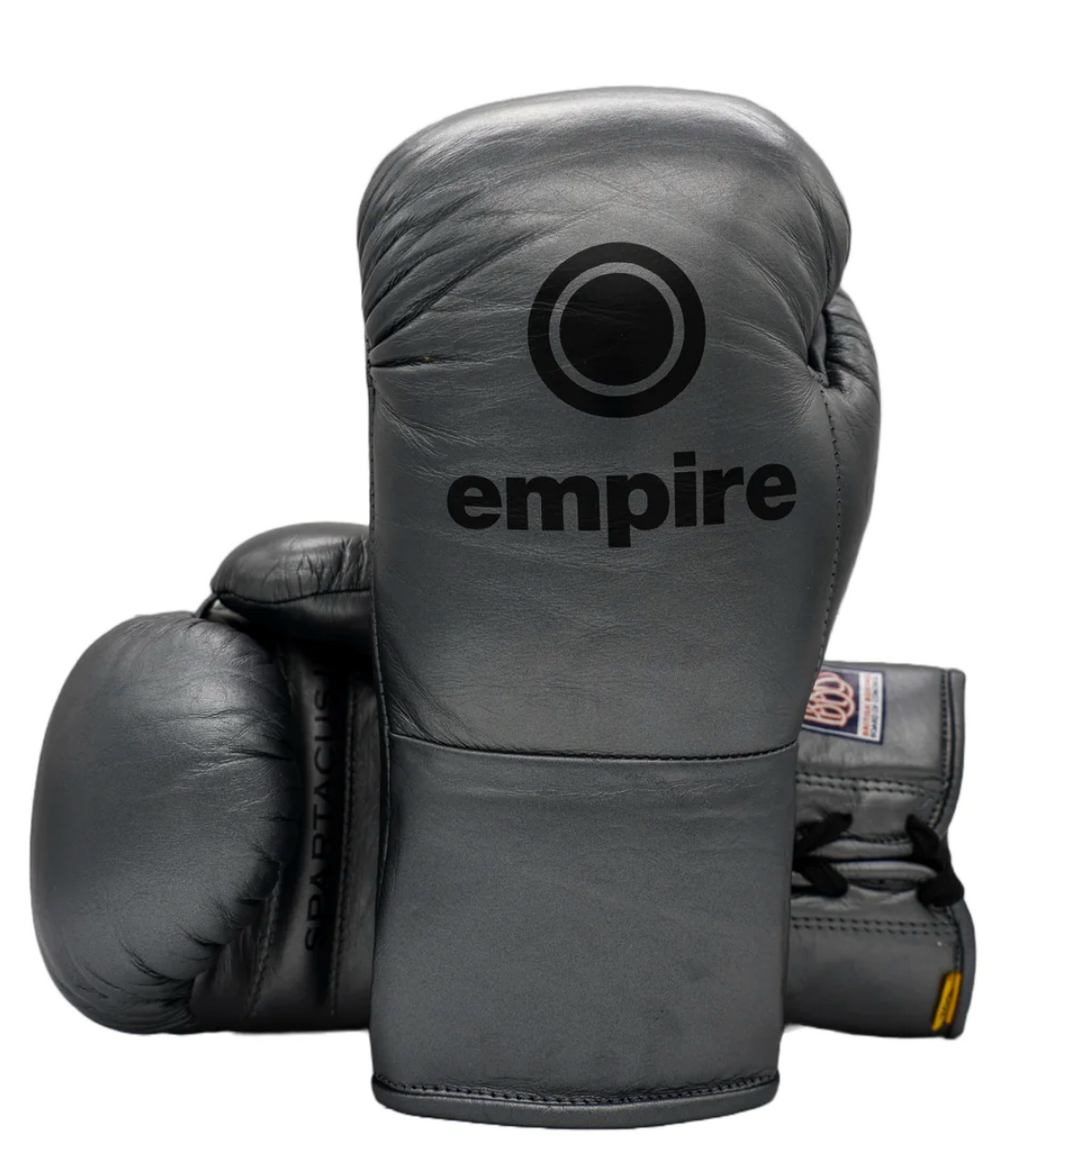 Empire Spartacus ll Sparring Gloves